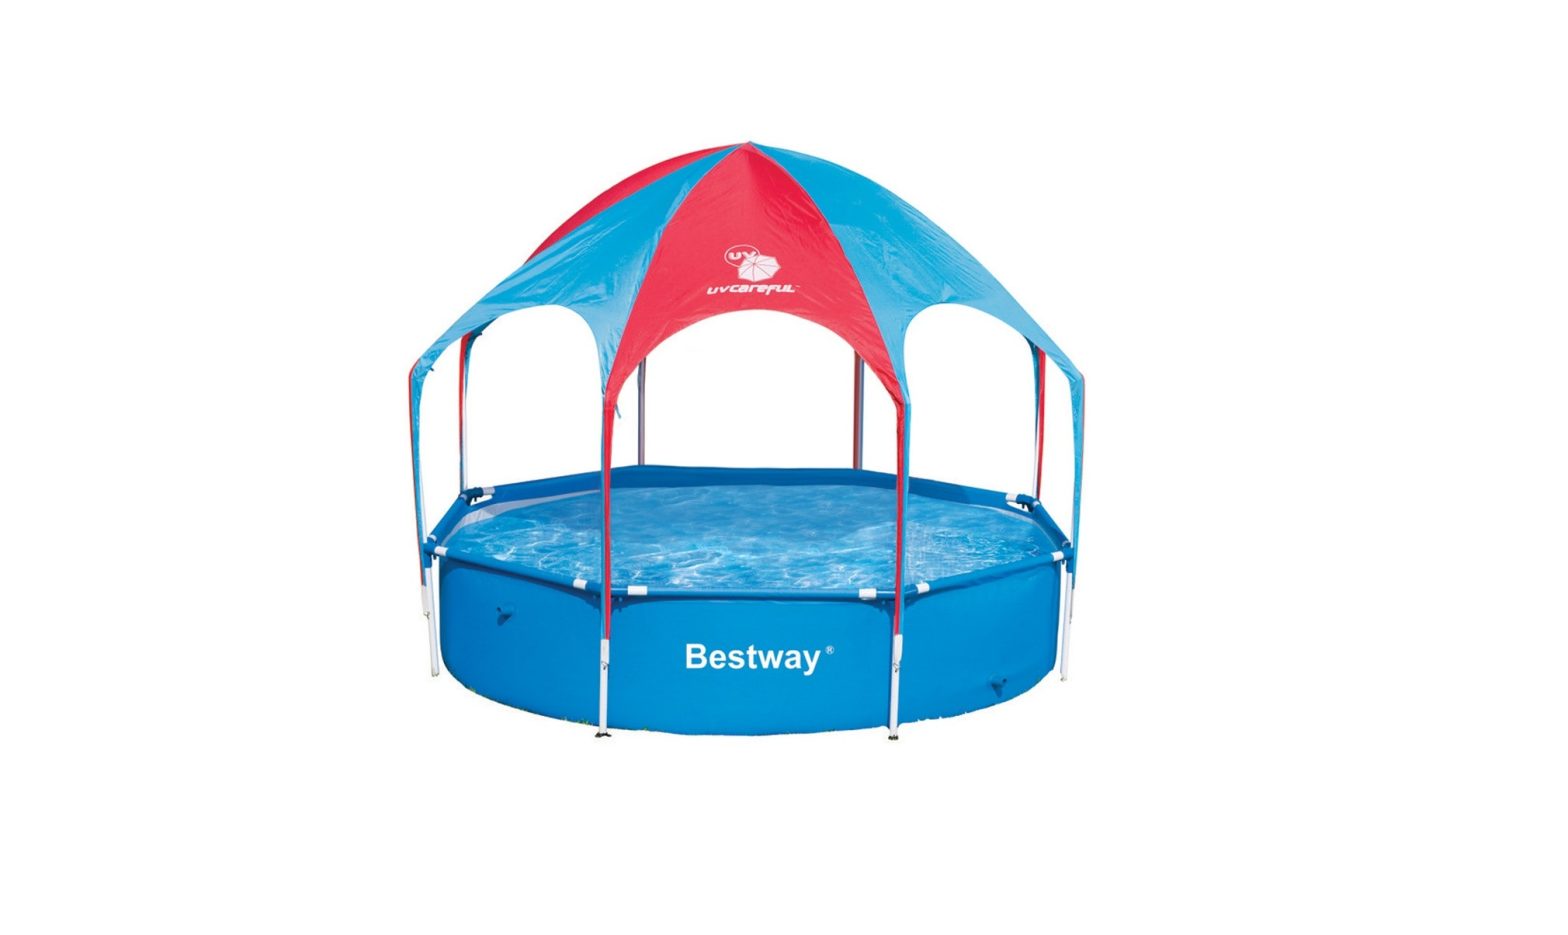 Bestway 43042081 Inflatable Adult and Infant Float with Canopy Owner’s Manual